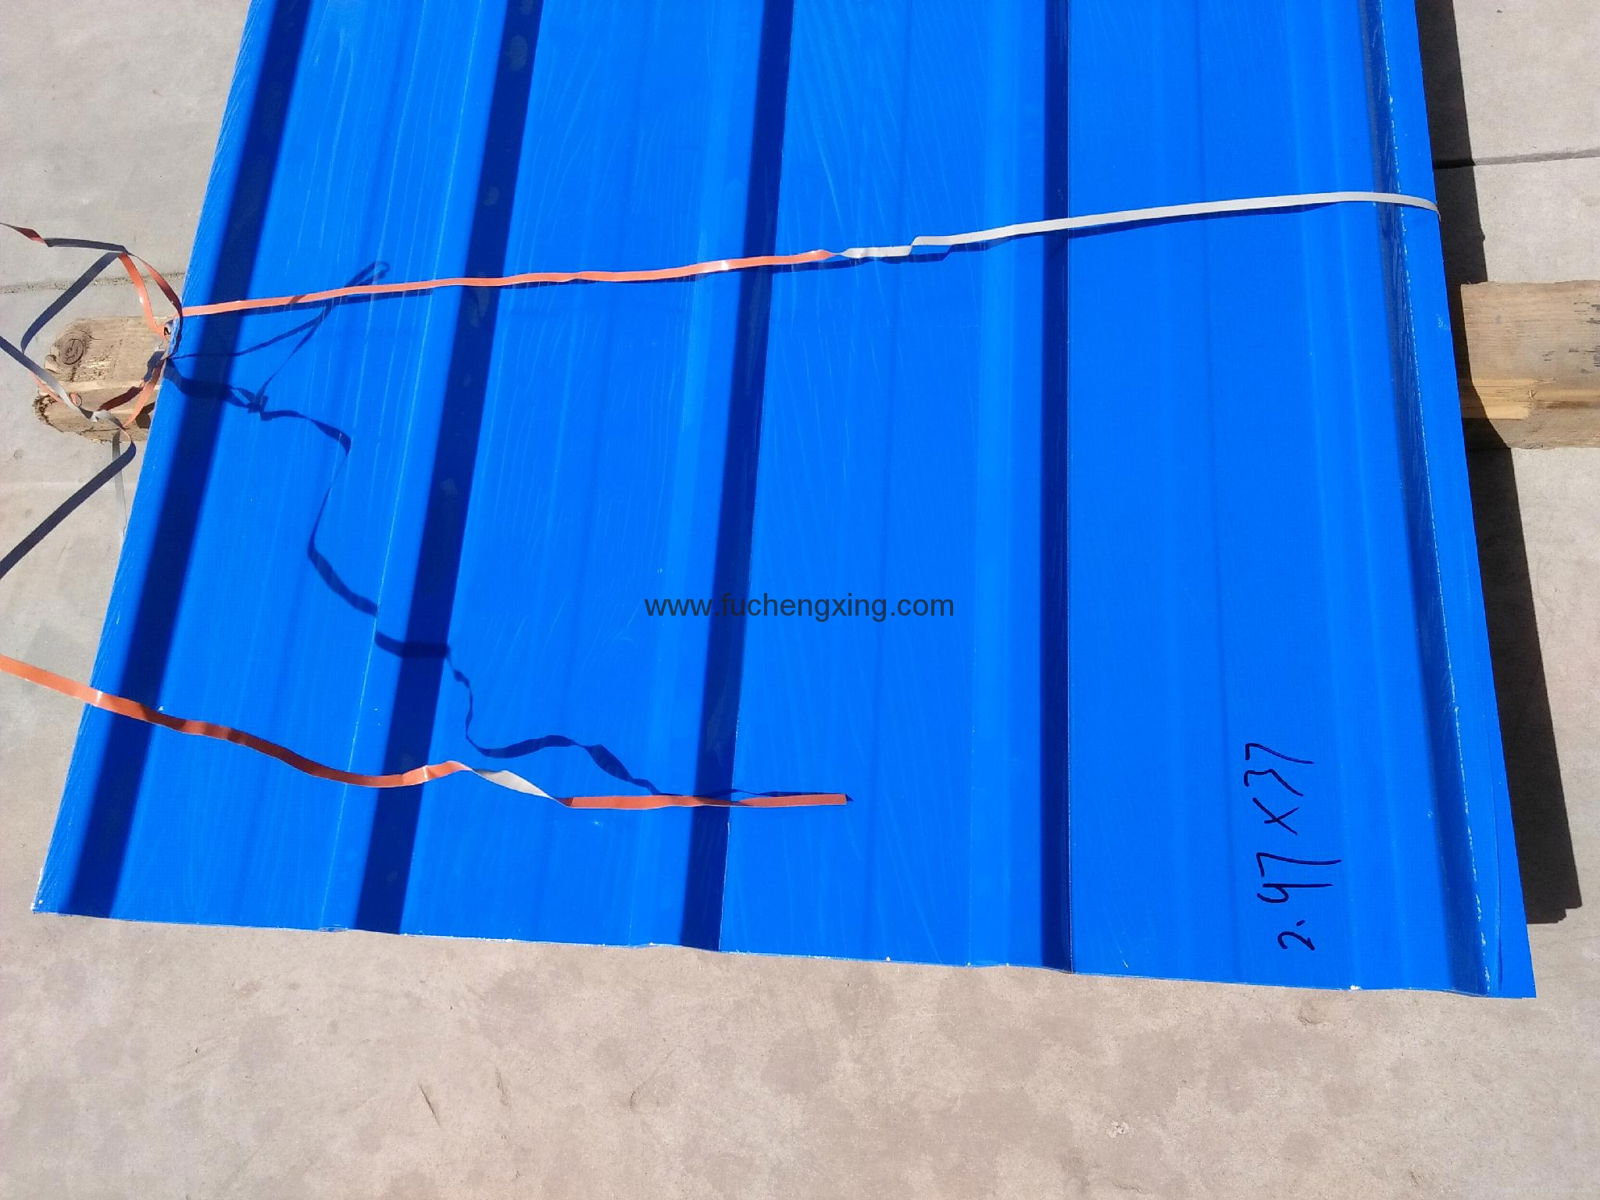 Quality Single Skin Color Steel Sheet for Roof and Wall 5